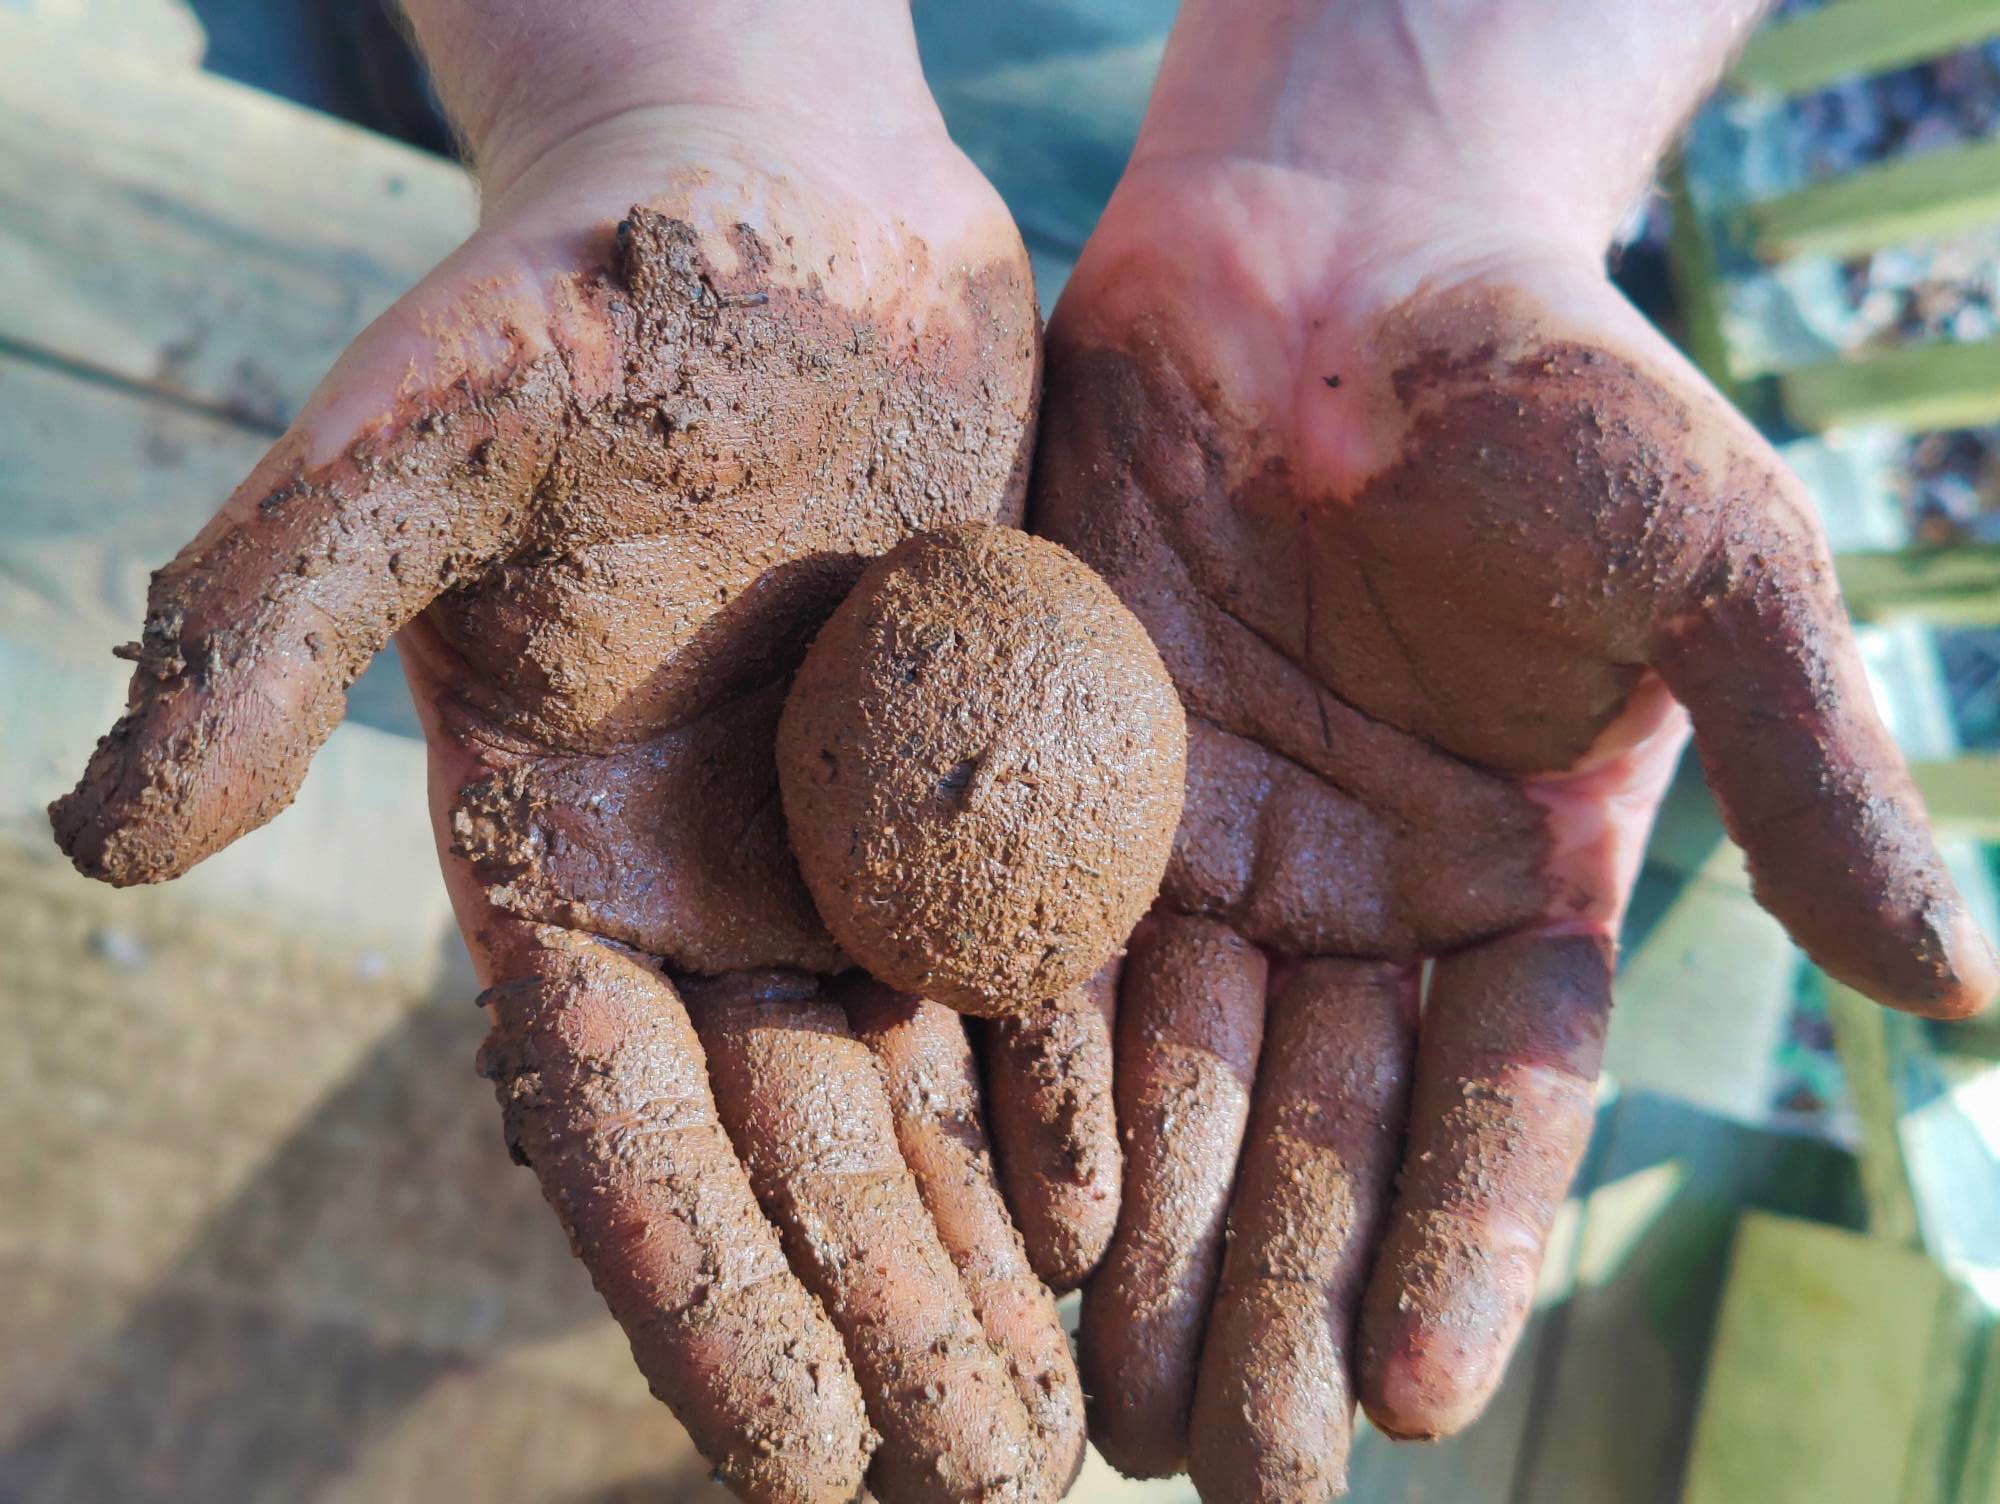 seed bomb (ball of mud with seeds inside) in the muddy hands of the person who made it